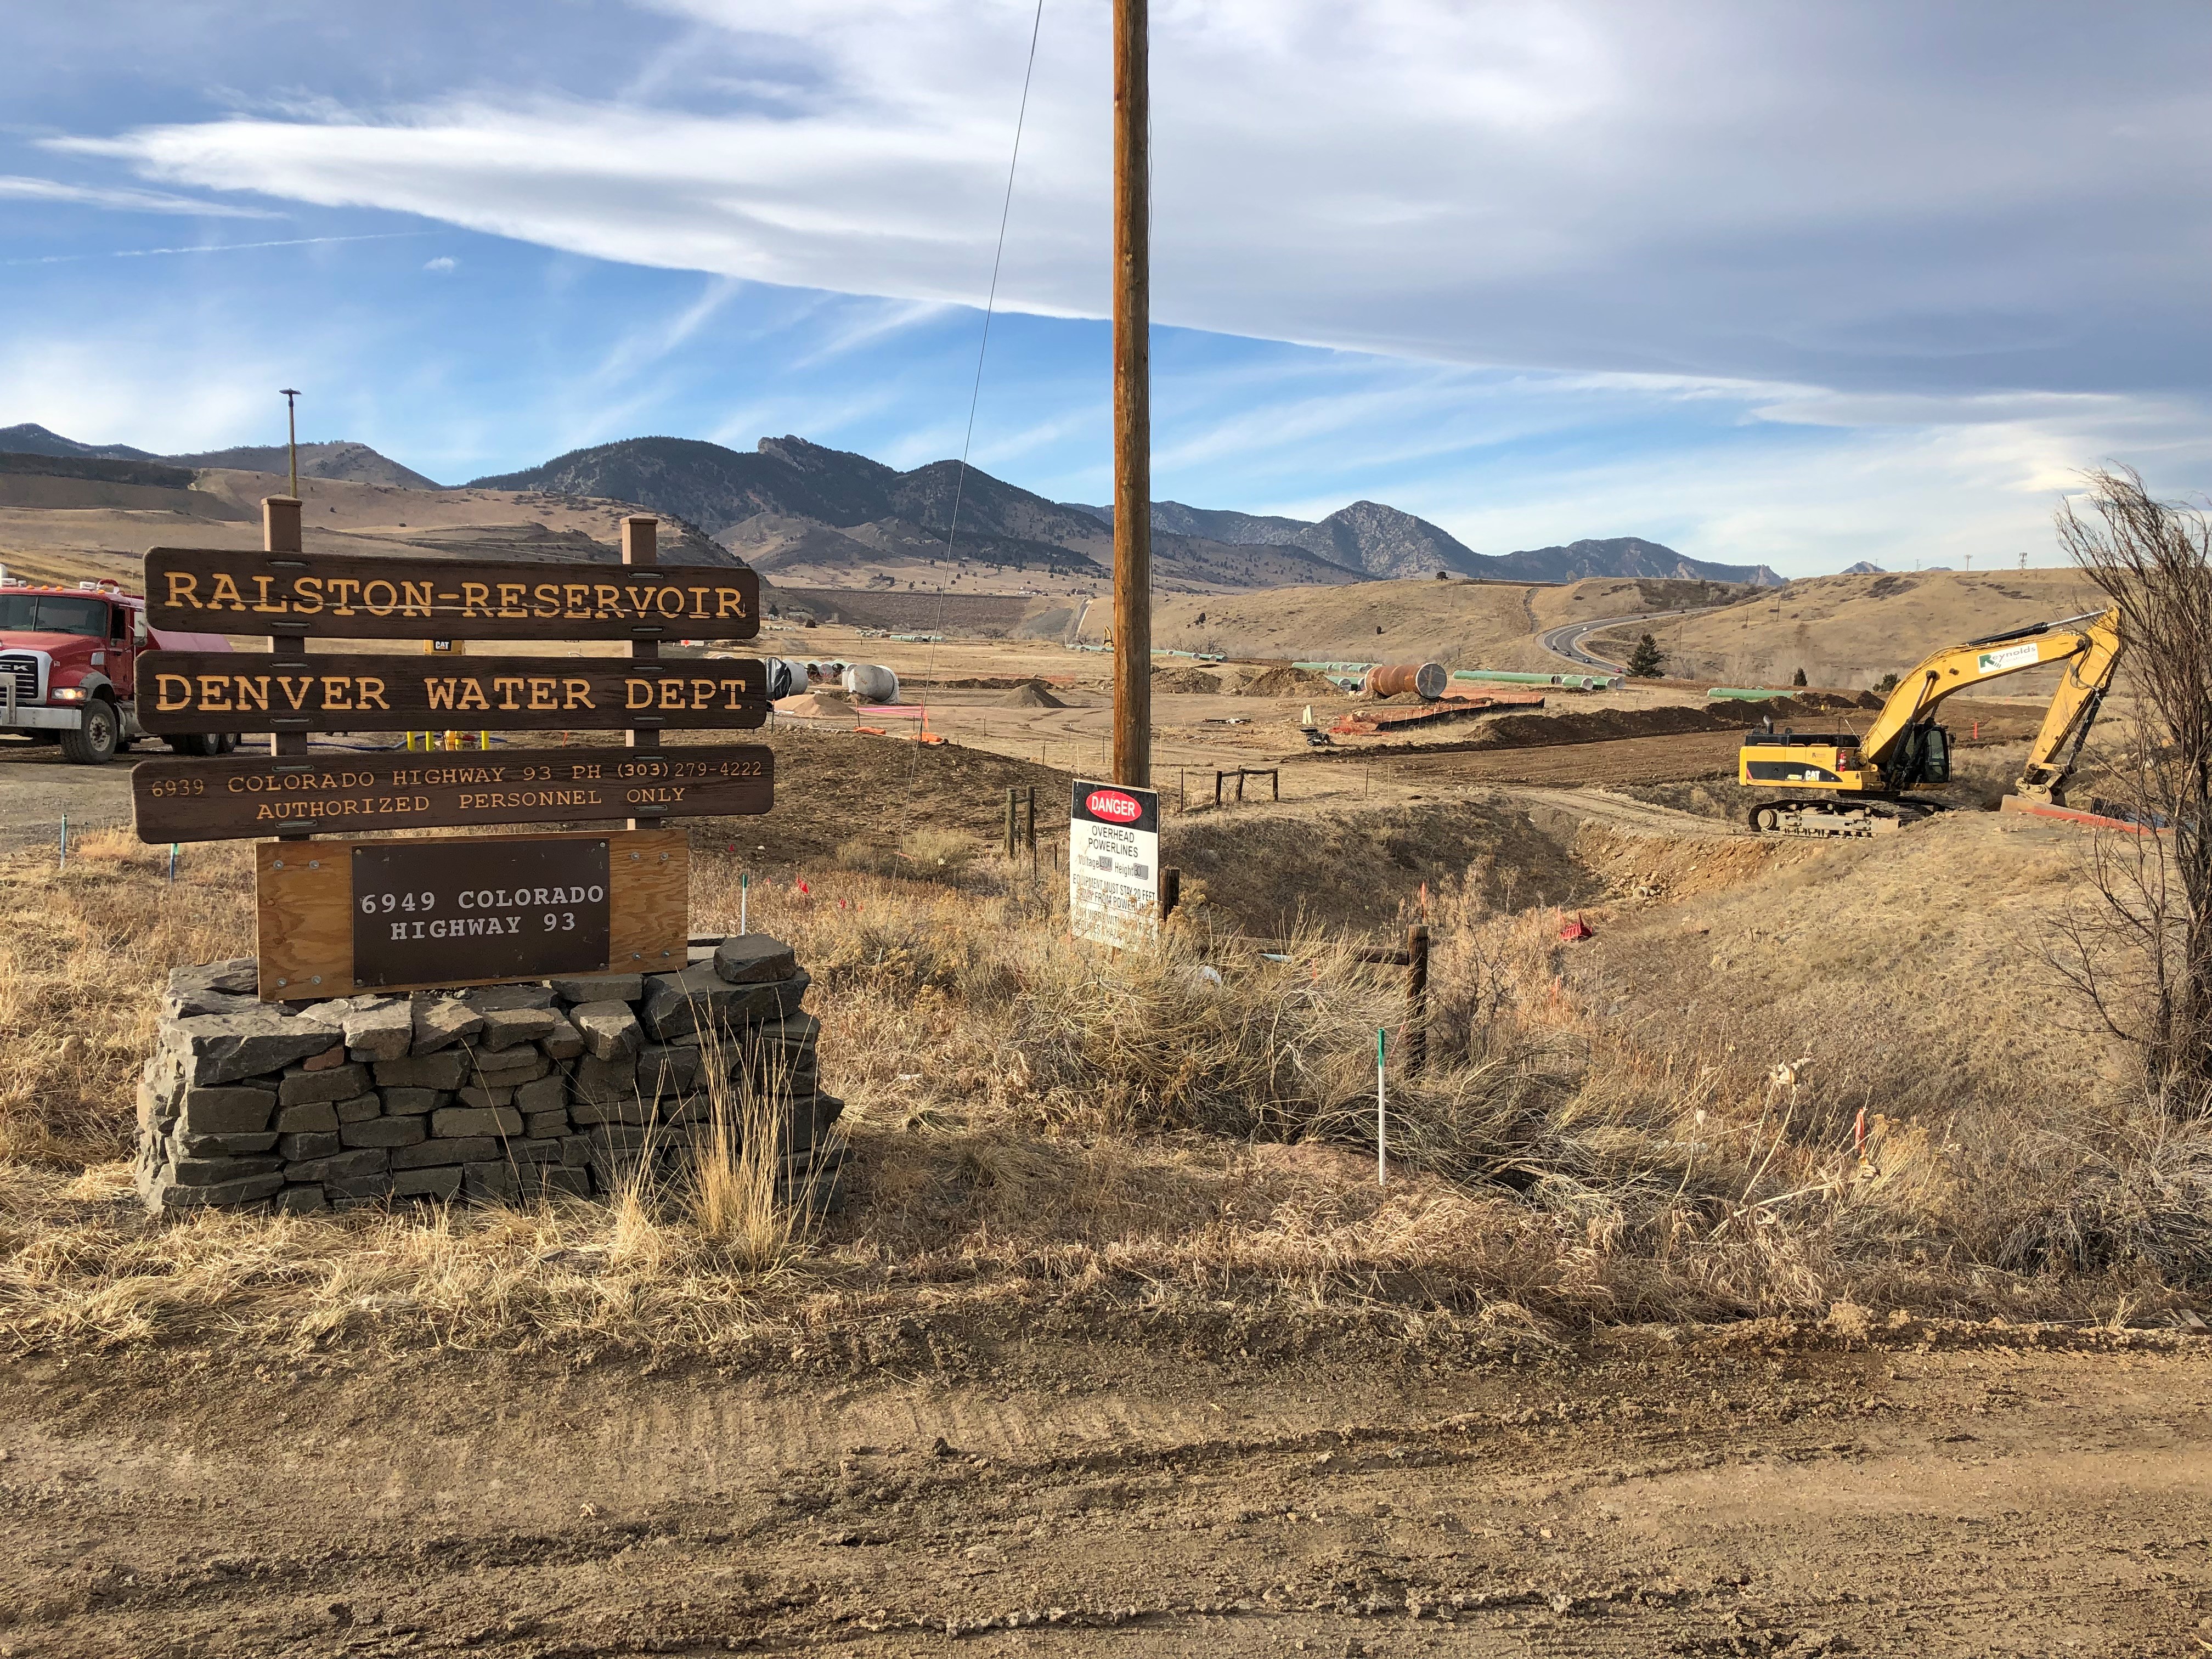 A sign says "Ralston Reservoir, Denver WAter Dept" and in the distance is construction equipment, foothills and white clouds in a blue sky.